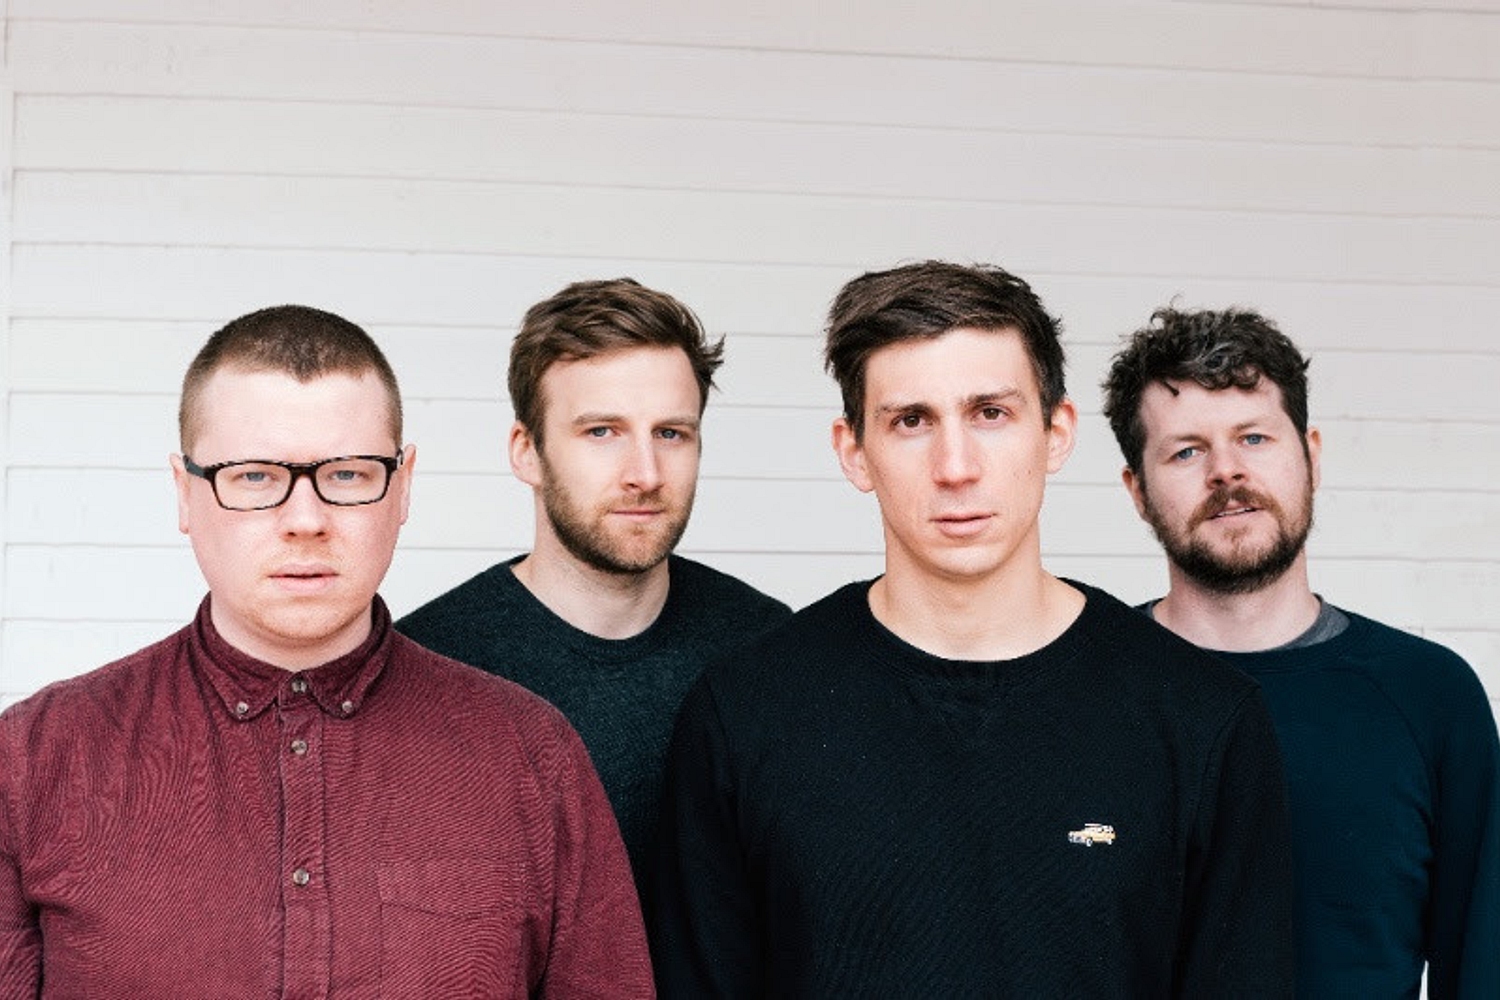 We Were Promised Jetpacks announce new album ‘The More I Sleep The Less I Dream’, share first track ‘Hanging In’